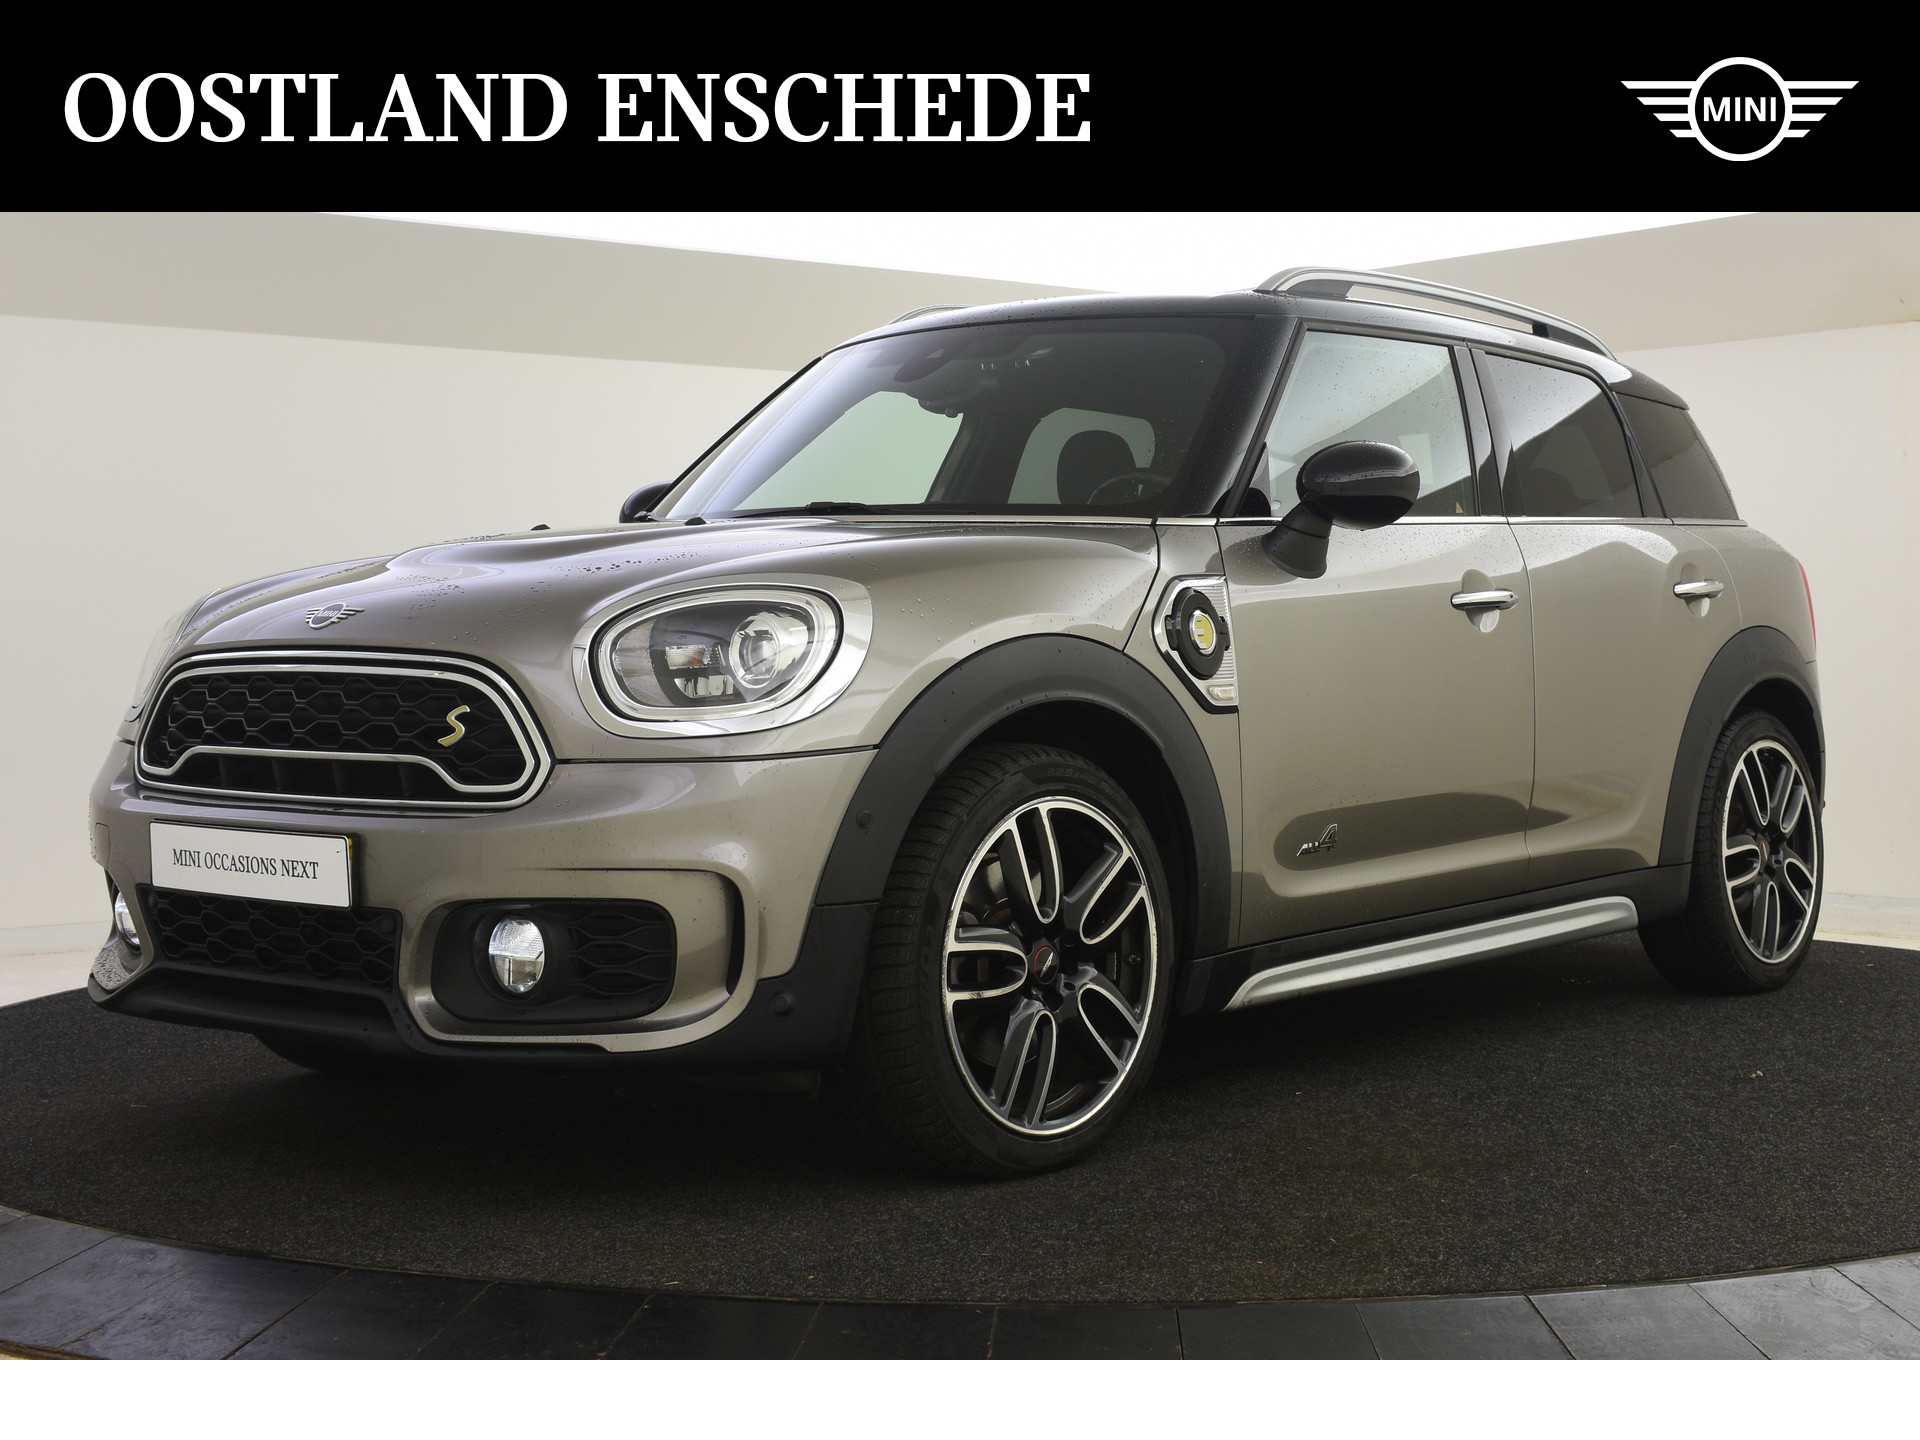 MINI Countryman Cooper S E ALL4 Automaat / Cruise Control / PDC achter / Airconditioning / DAB / Navigatie bij viaBOVAG.nl